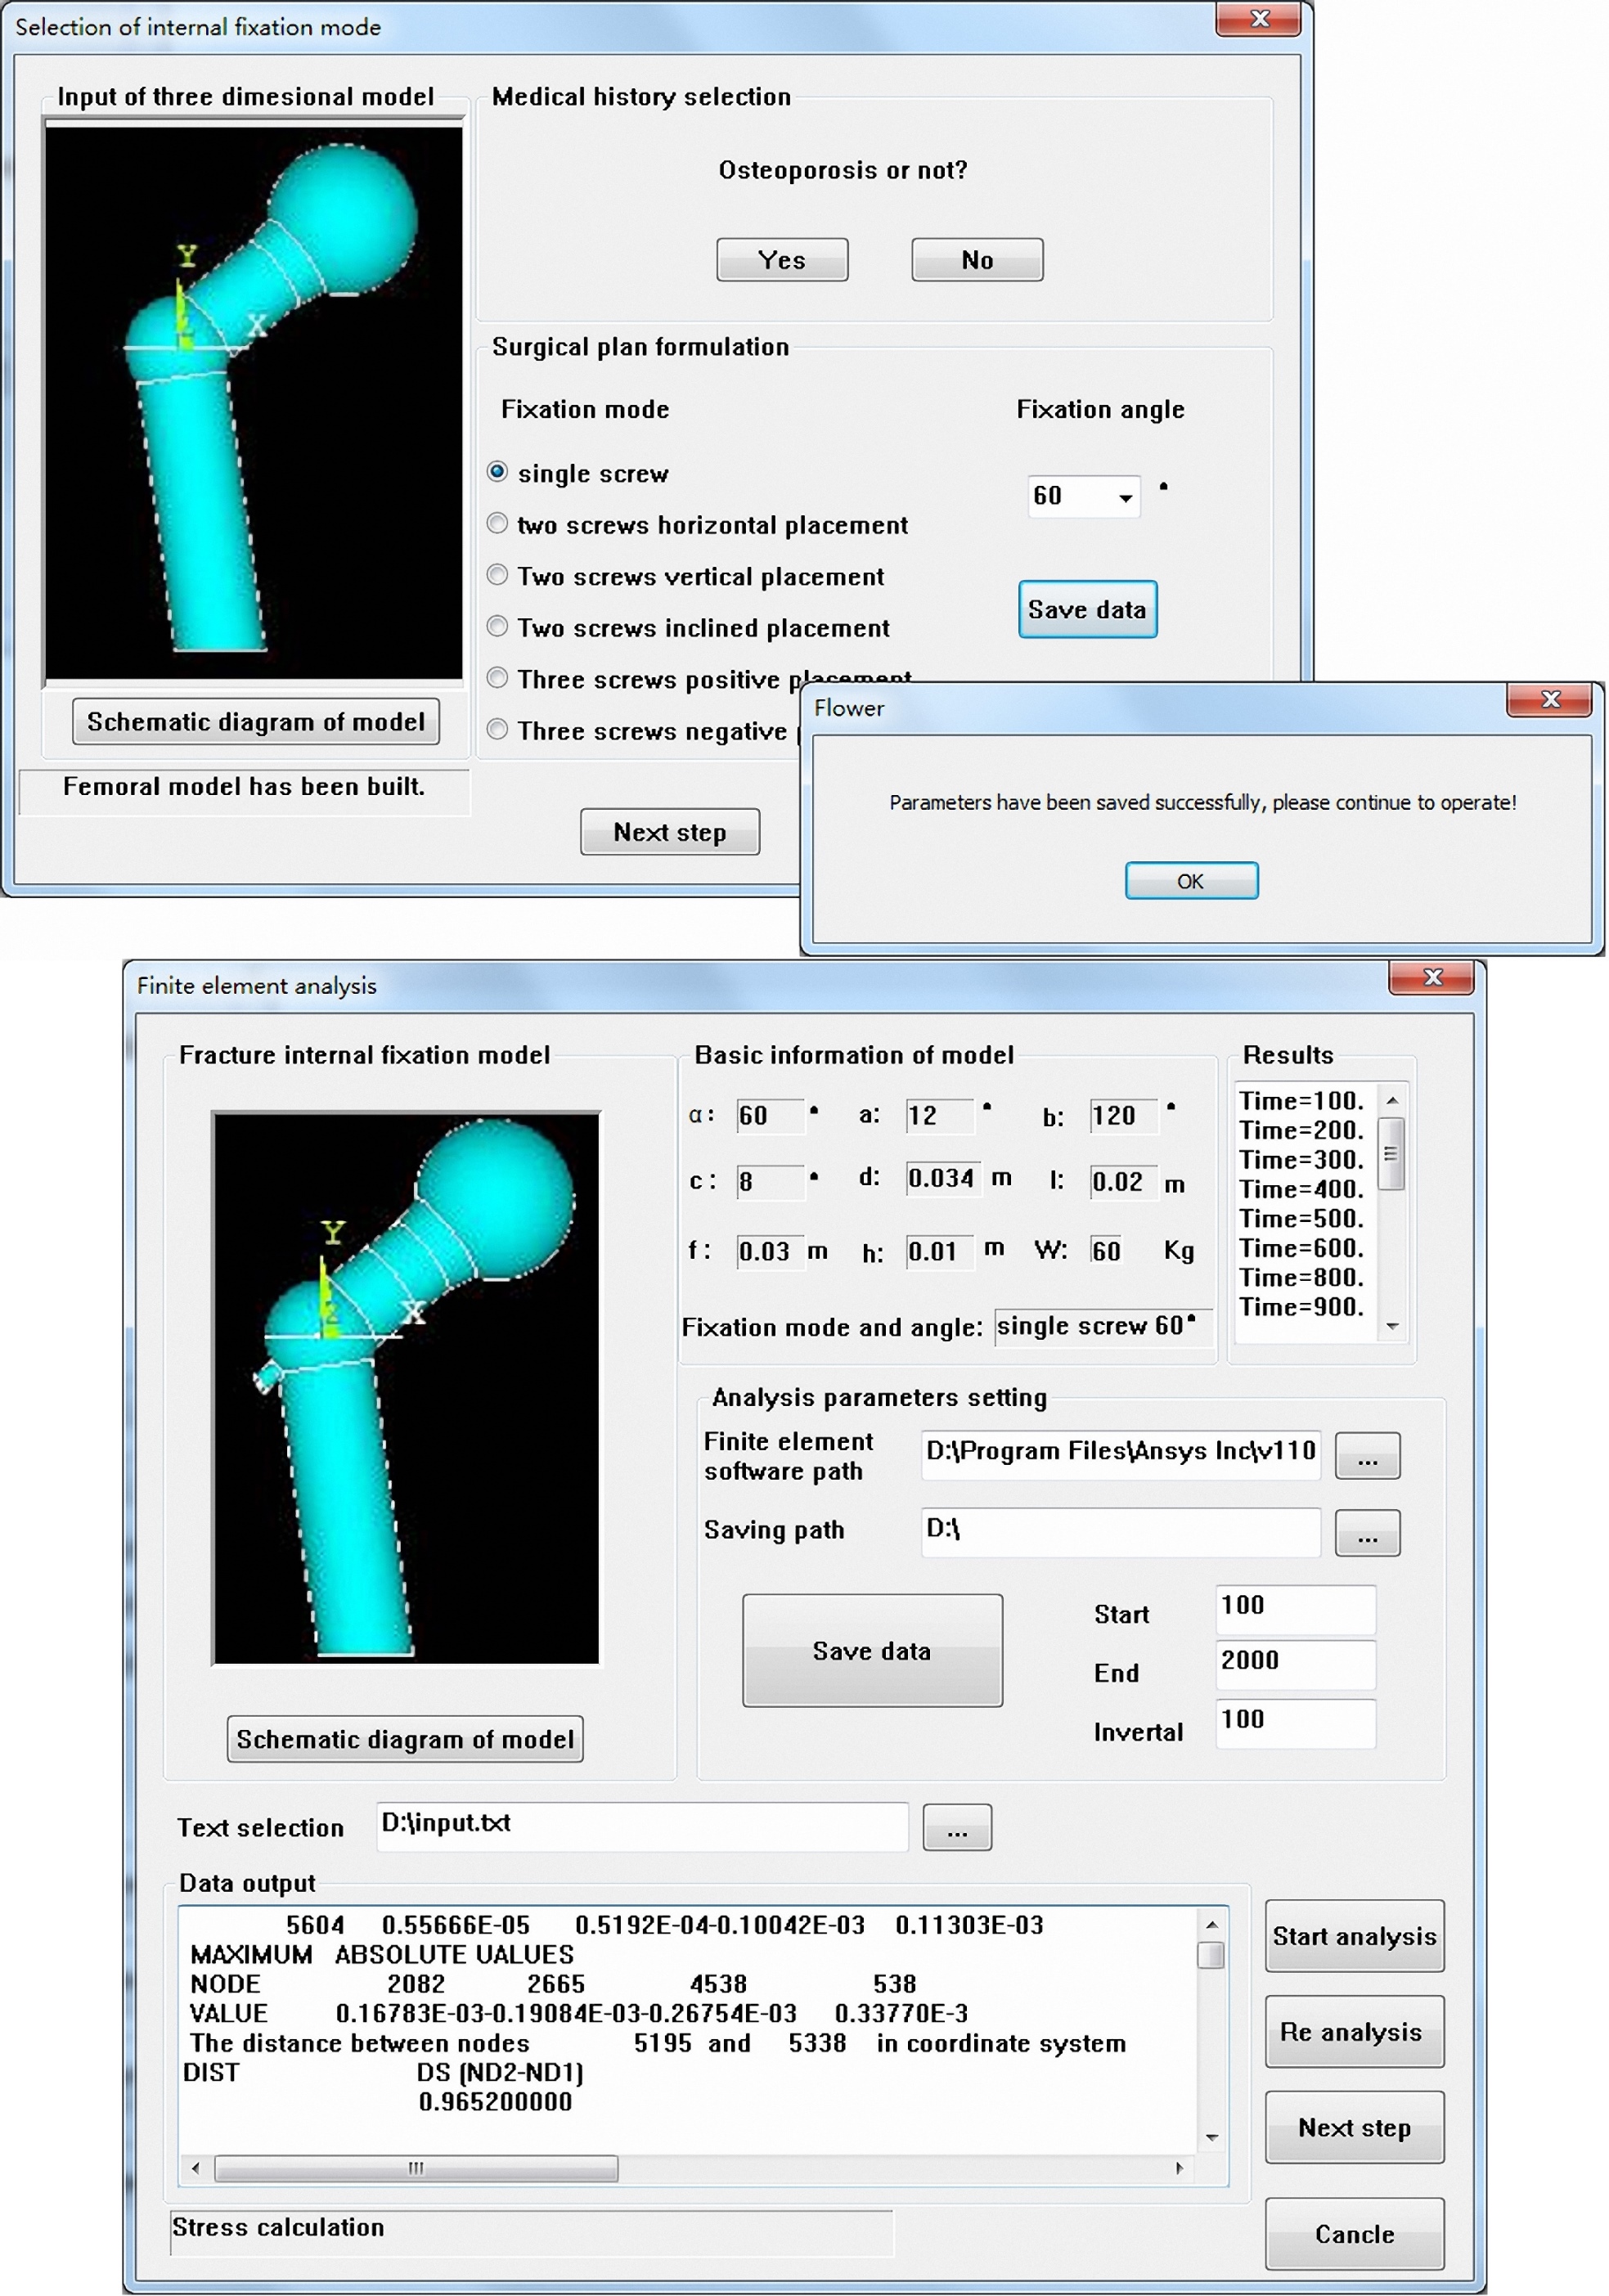 Selection interface for internal fixation mode and finite element analysis interface.